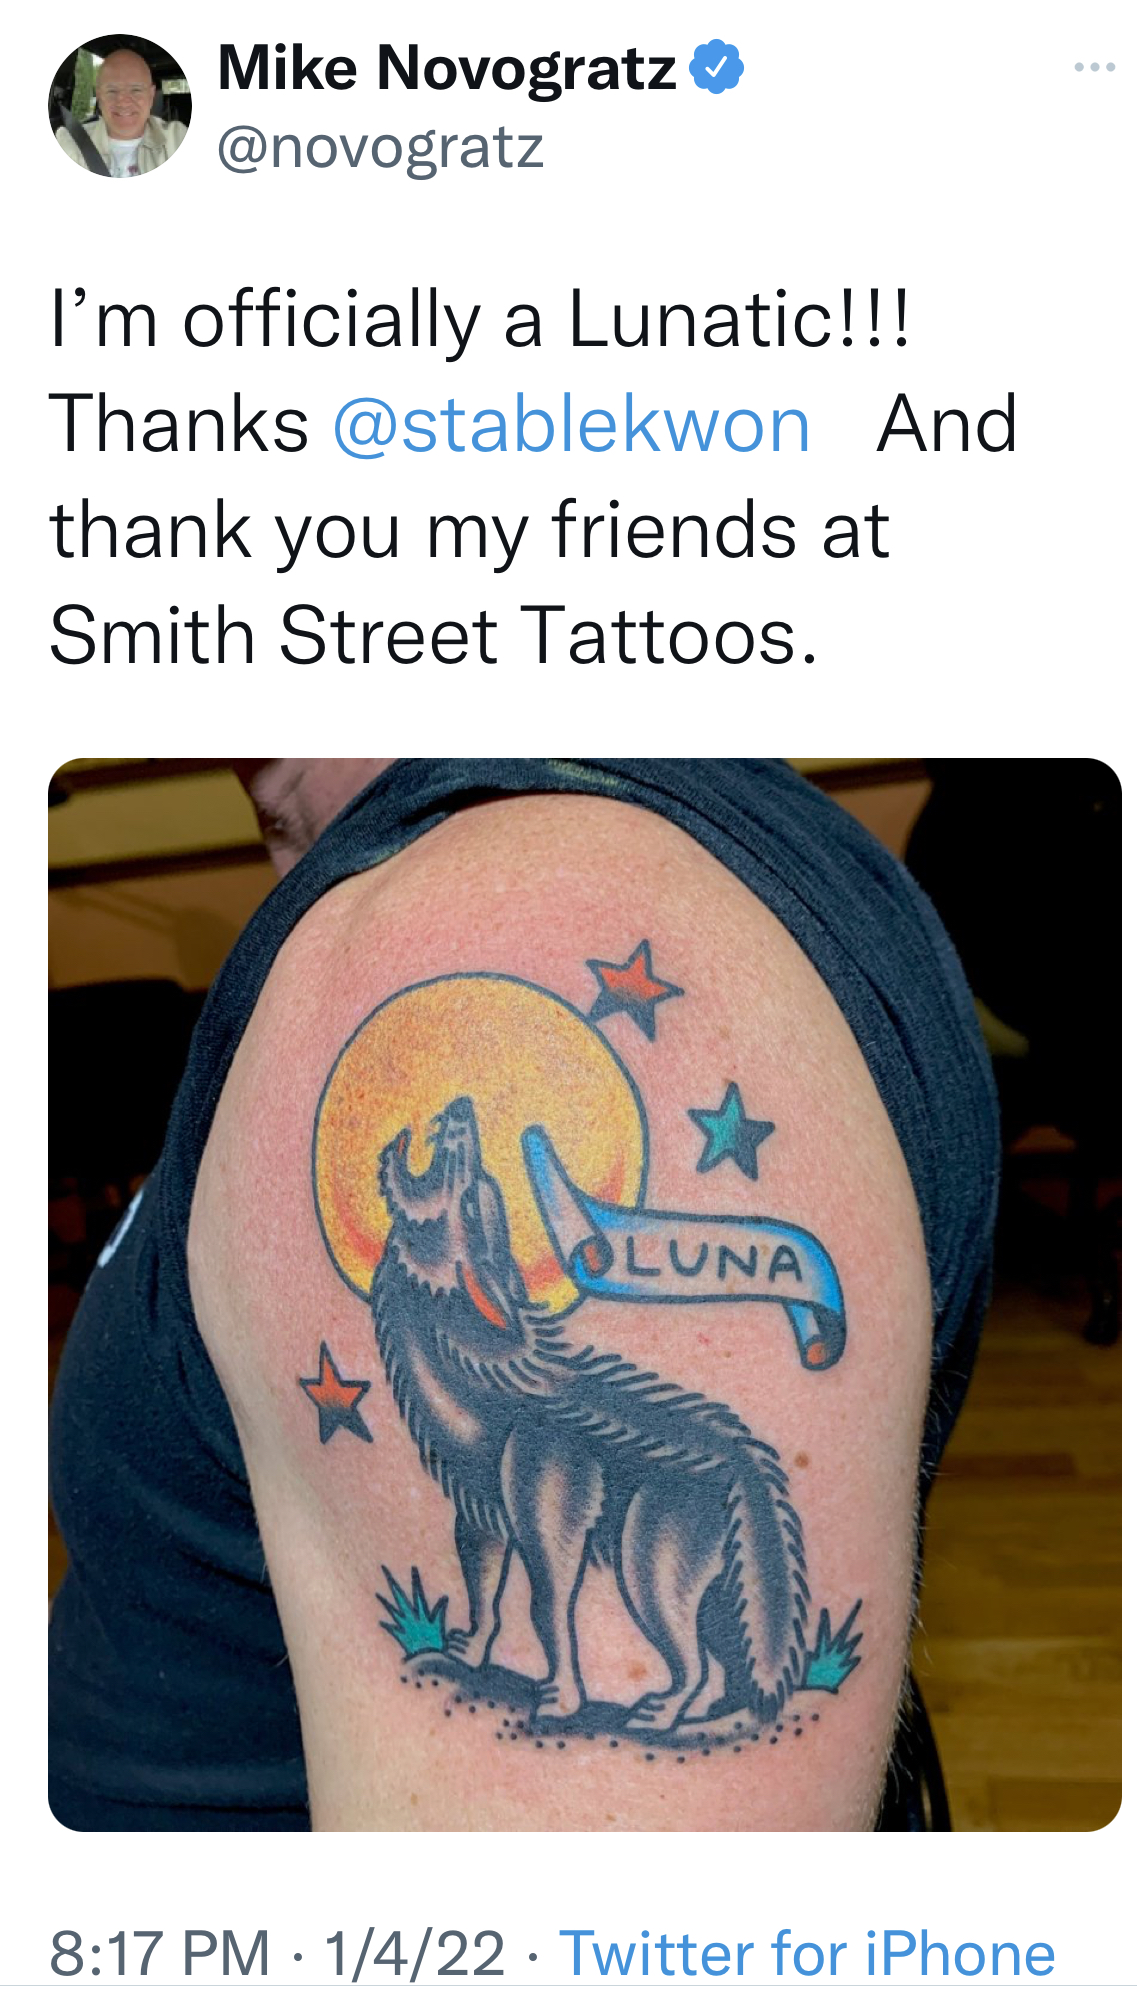 Crypto Investing Mike Novogratz and the Curse of the Luna Tattoo   Bloomberg